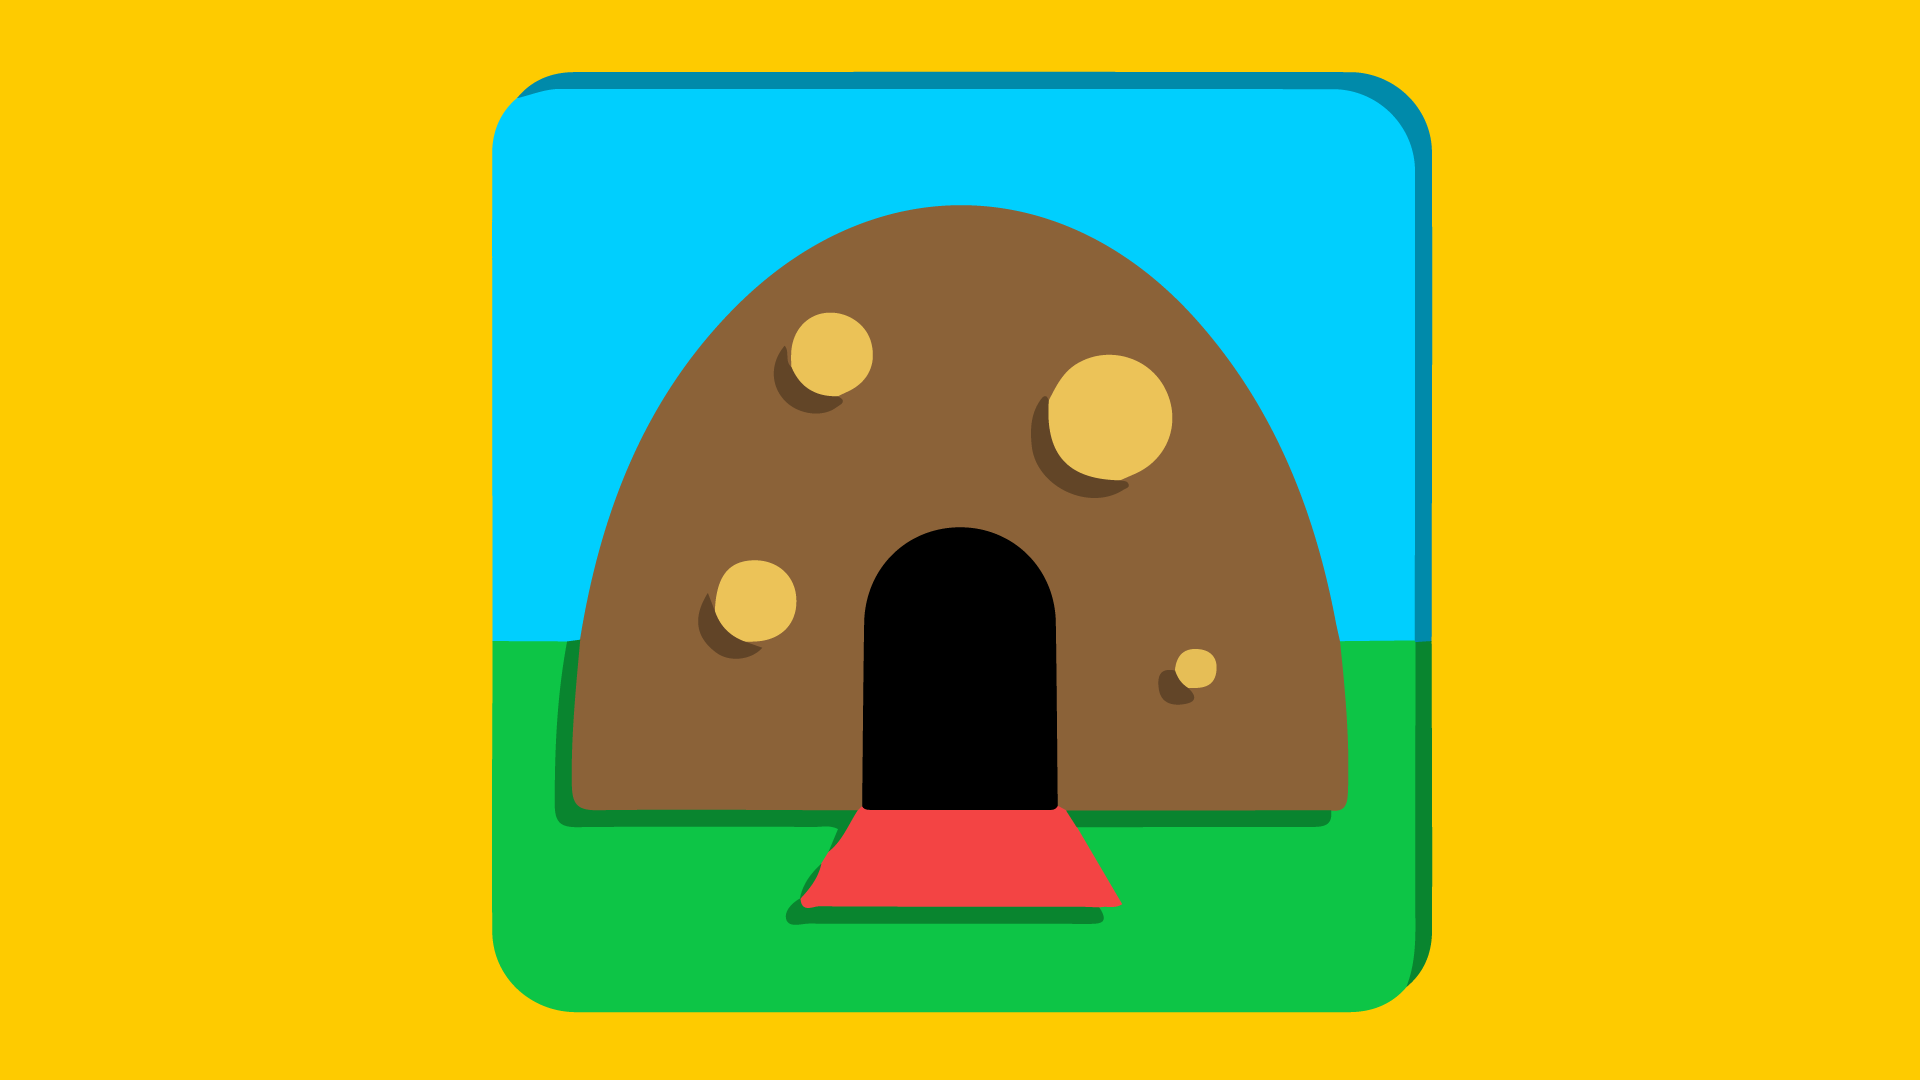 Icon for Good Dirt Living